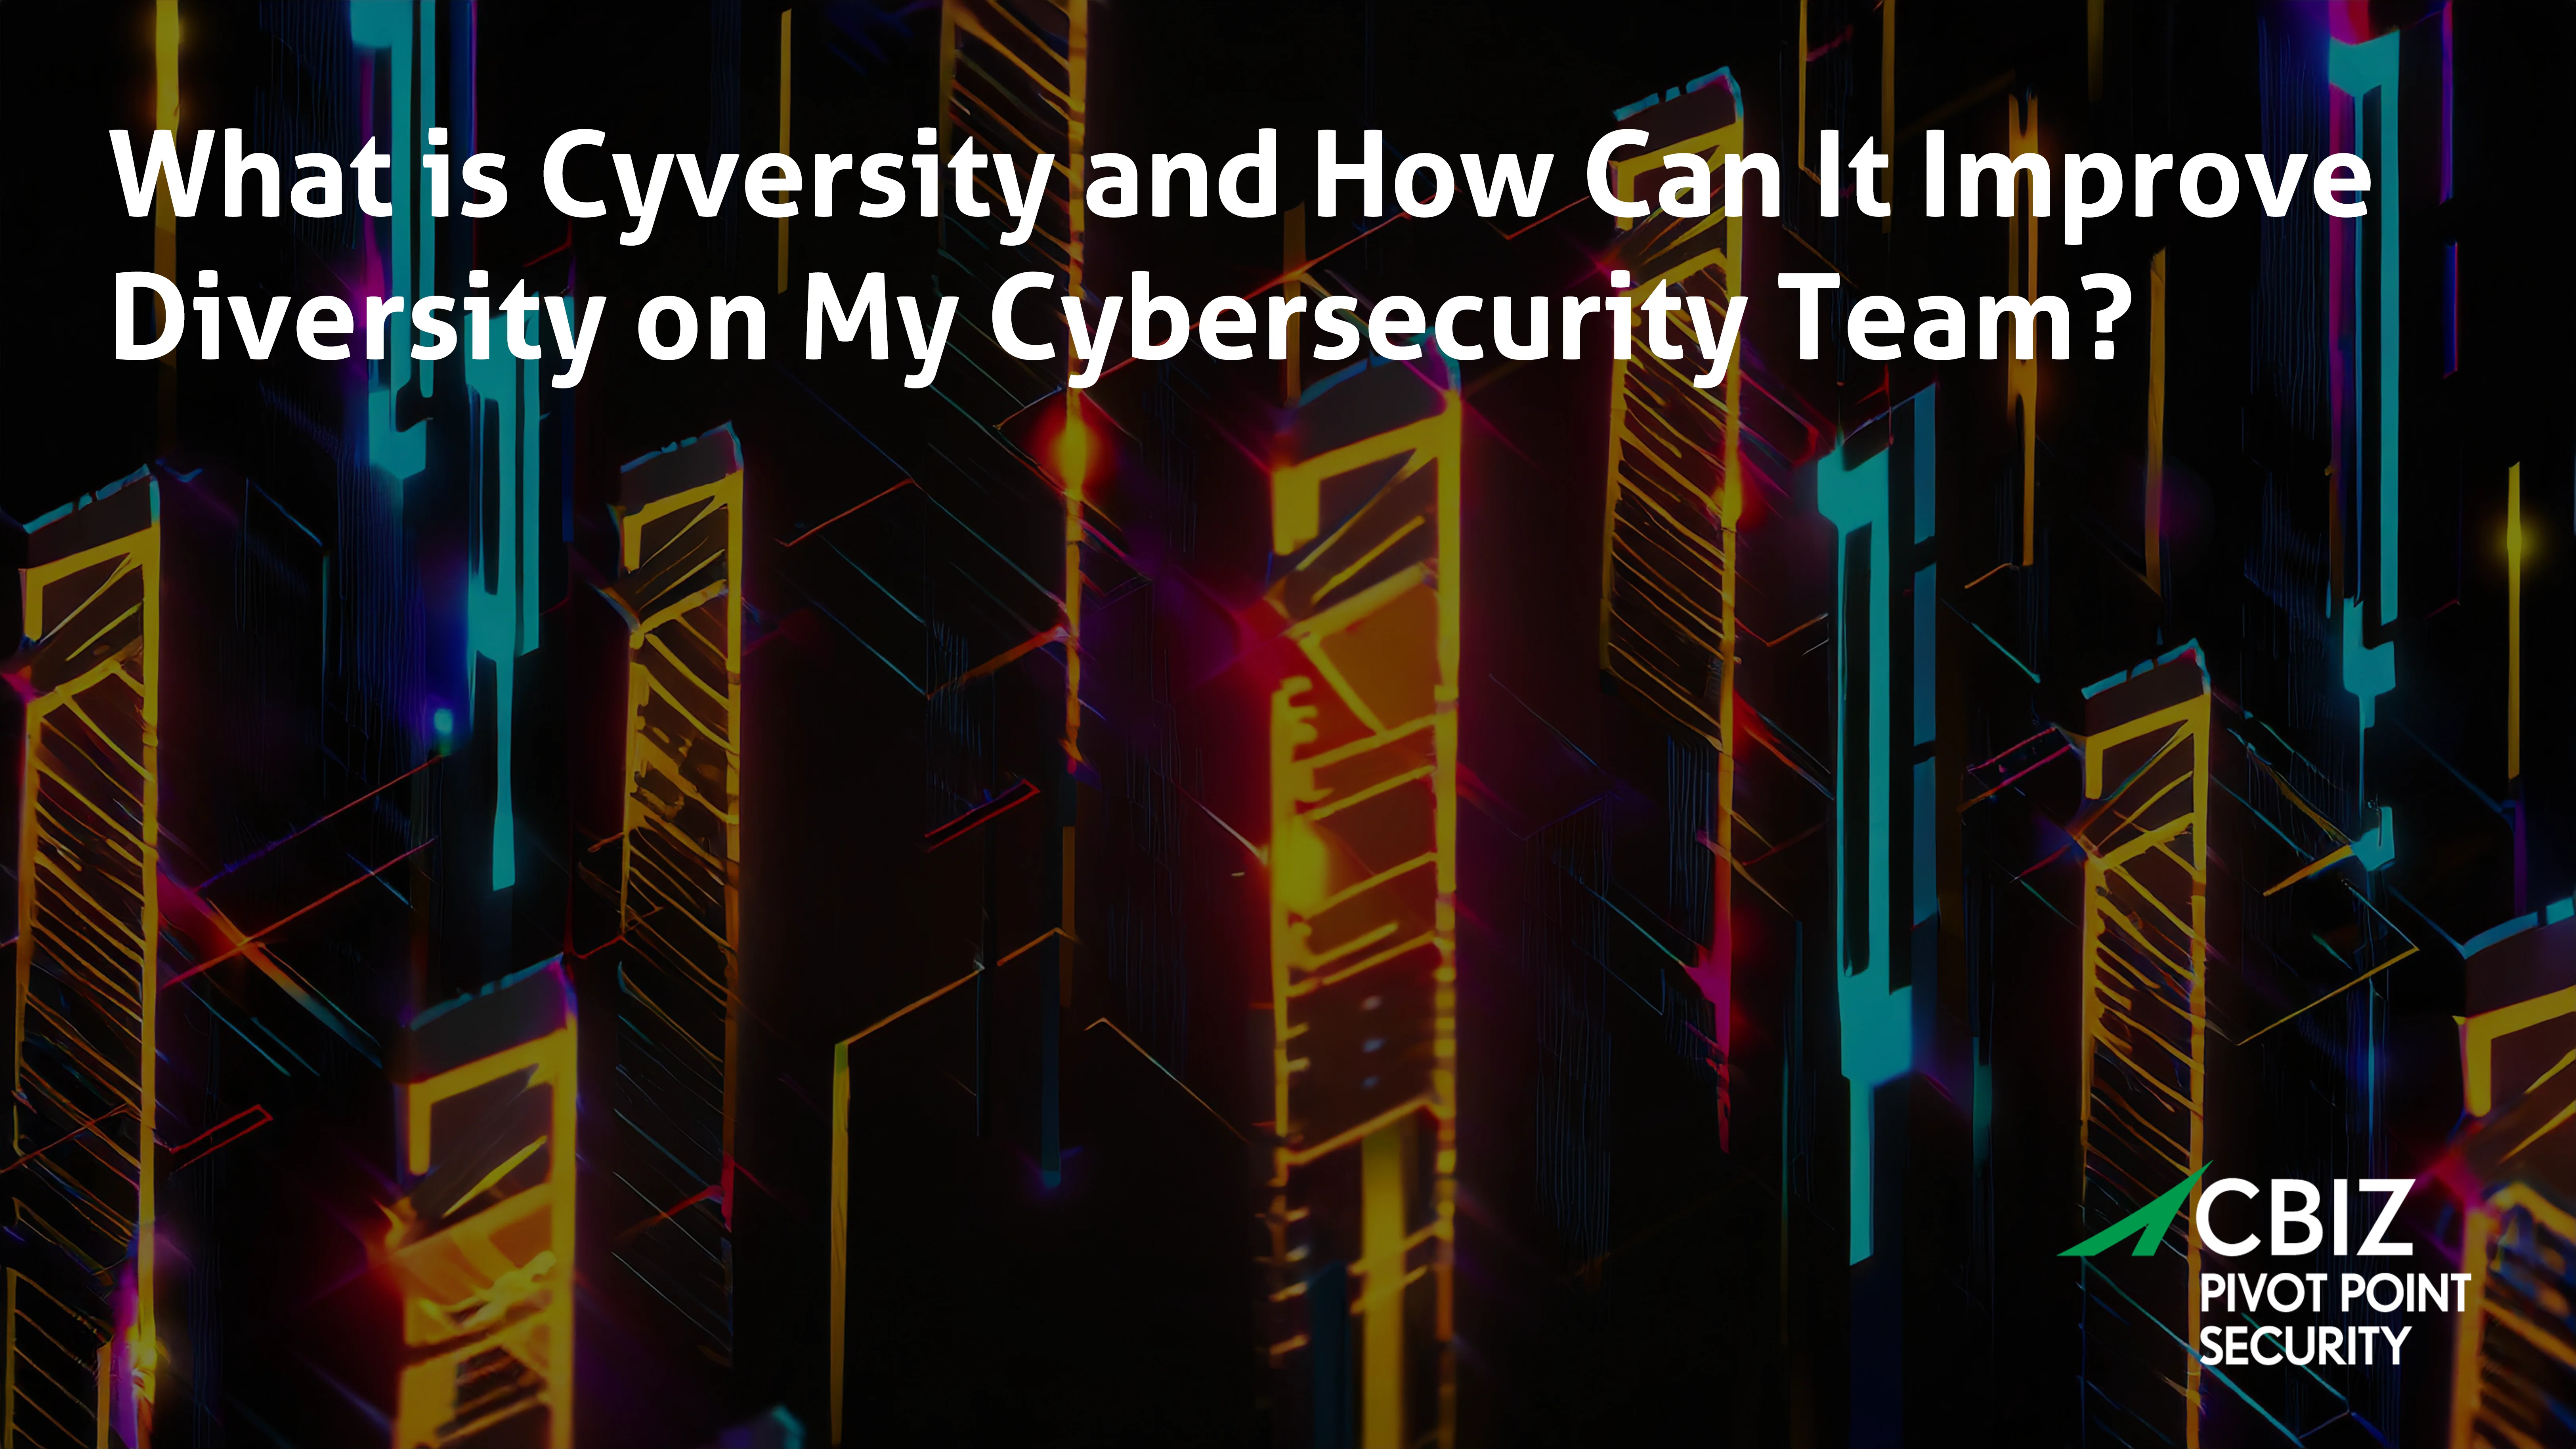 what is cyversity and how can it improve my cybersecurity team () () ()